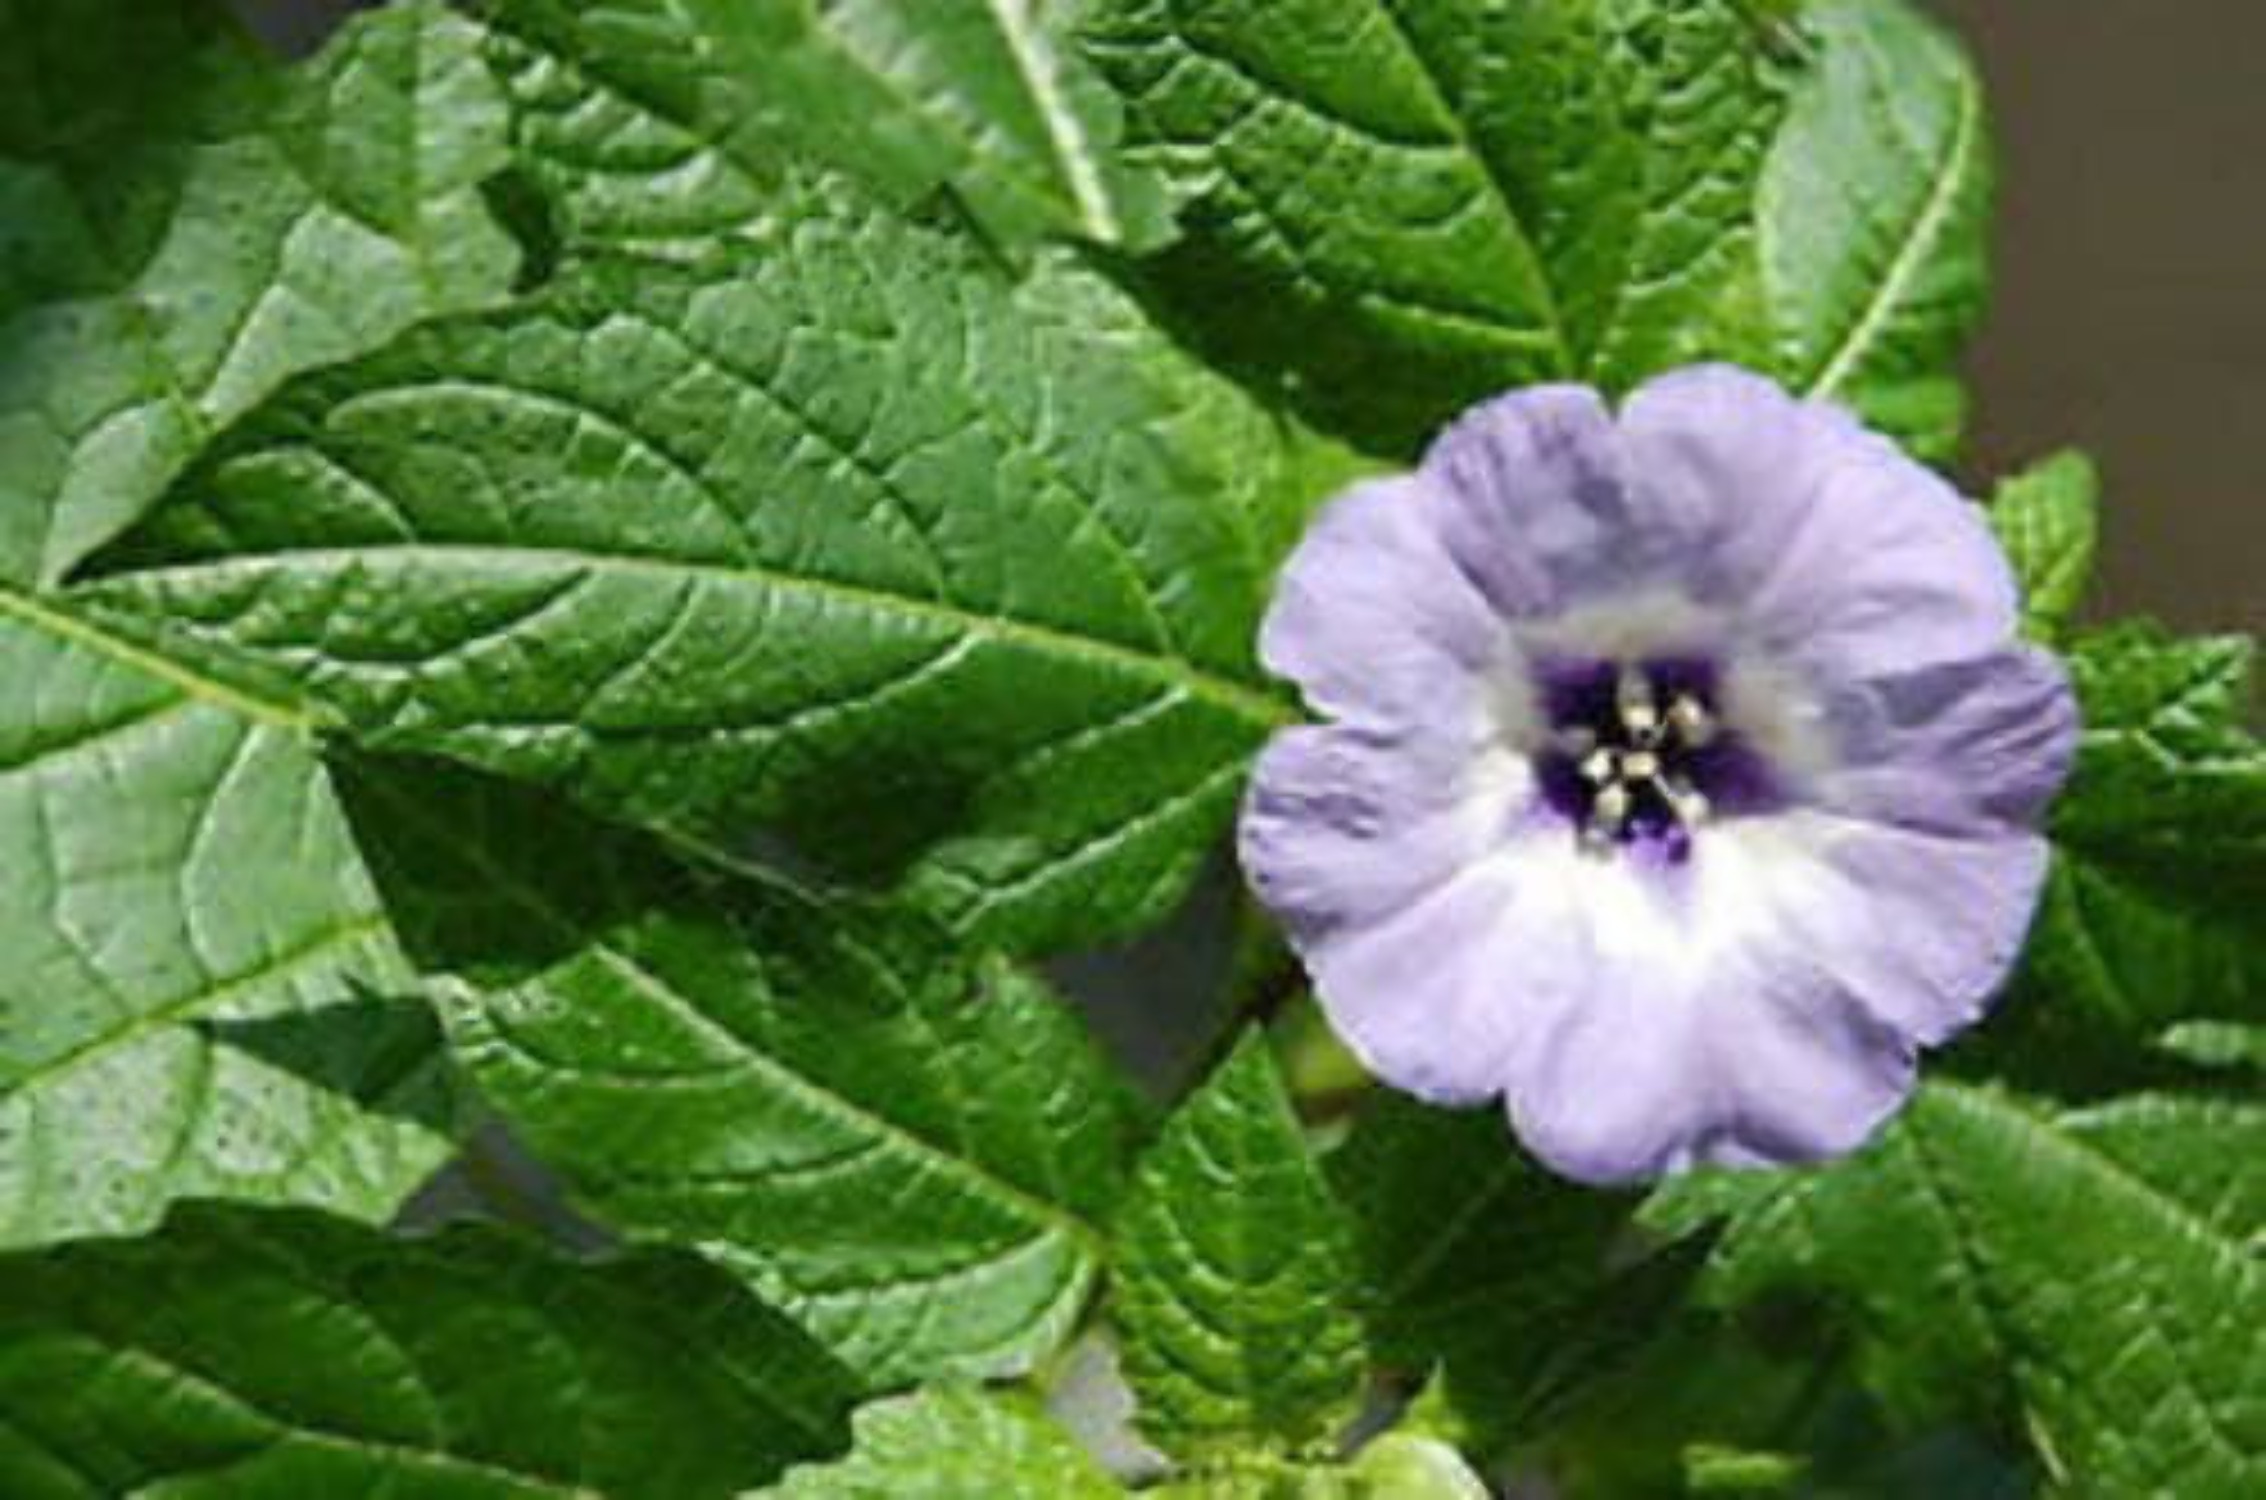 100 APPLE OF PERU Shoofly Plant Nicandra Physalodes Violet Blue Flower Seeds - image 1 of 5